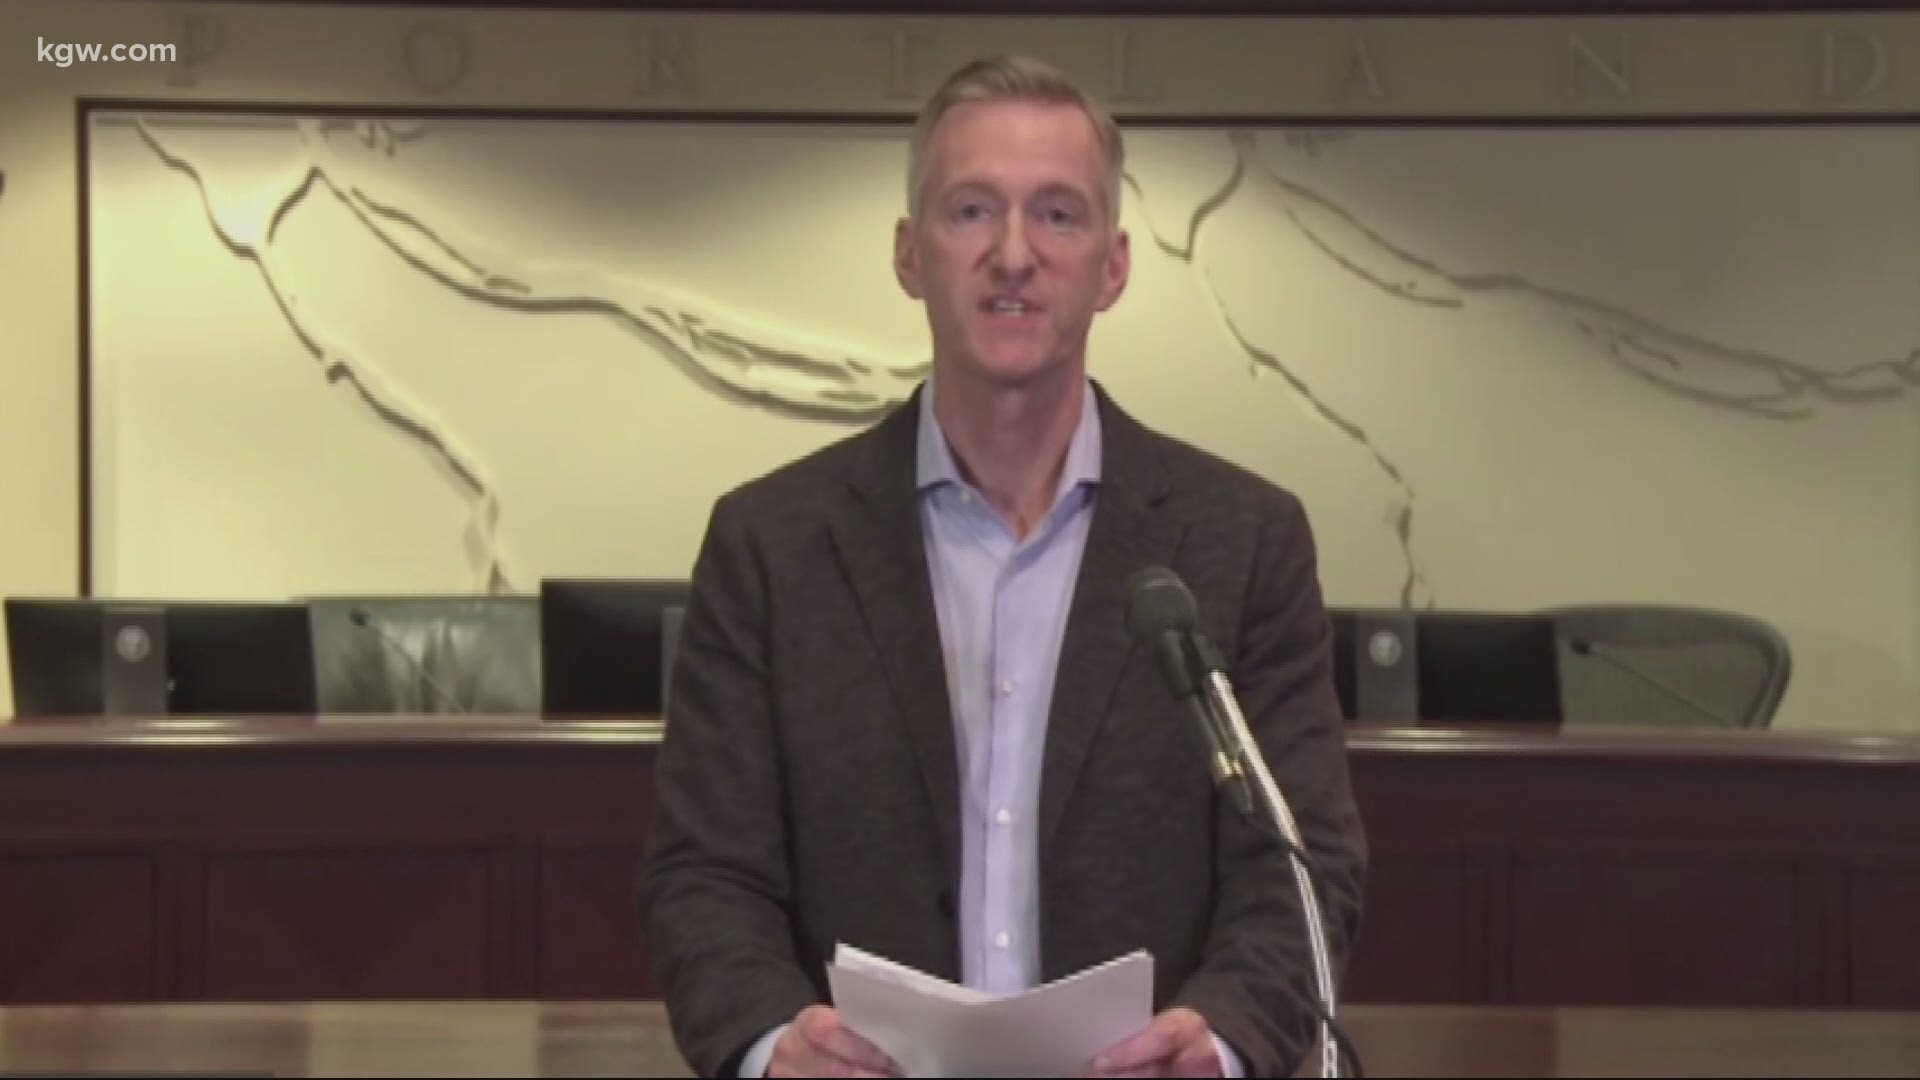 After weeks of frustration in the business community, Mayor Ted Wheeler shared what he plans to do about it.